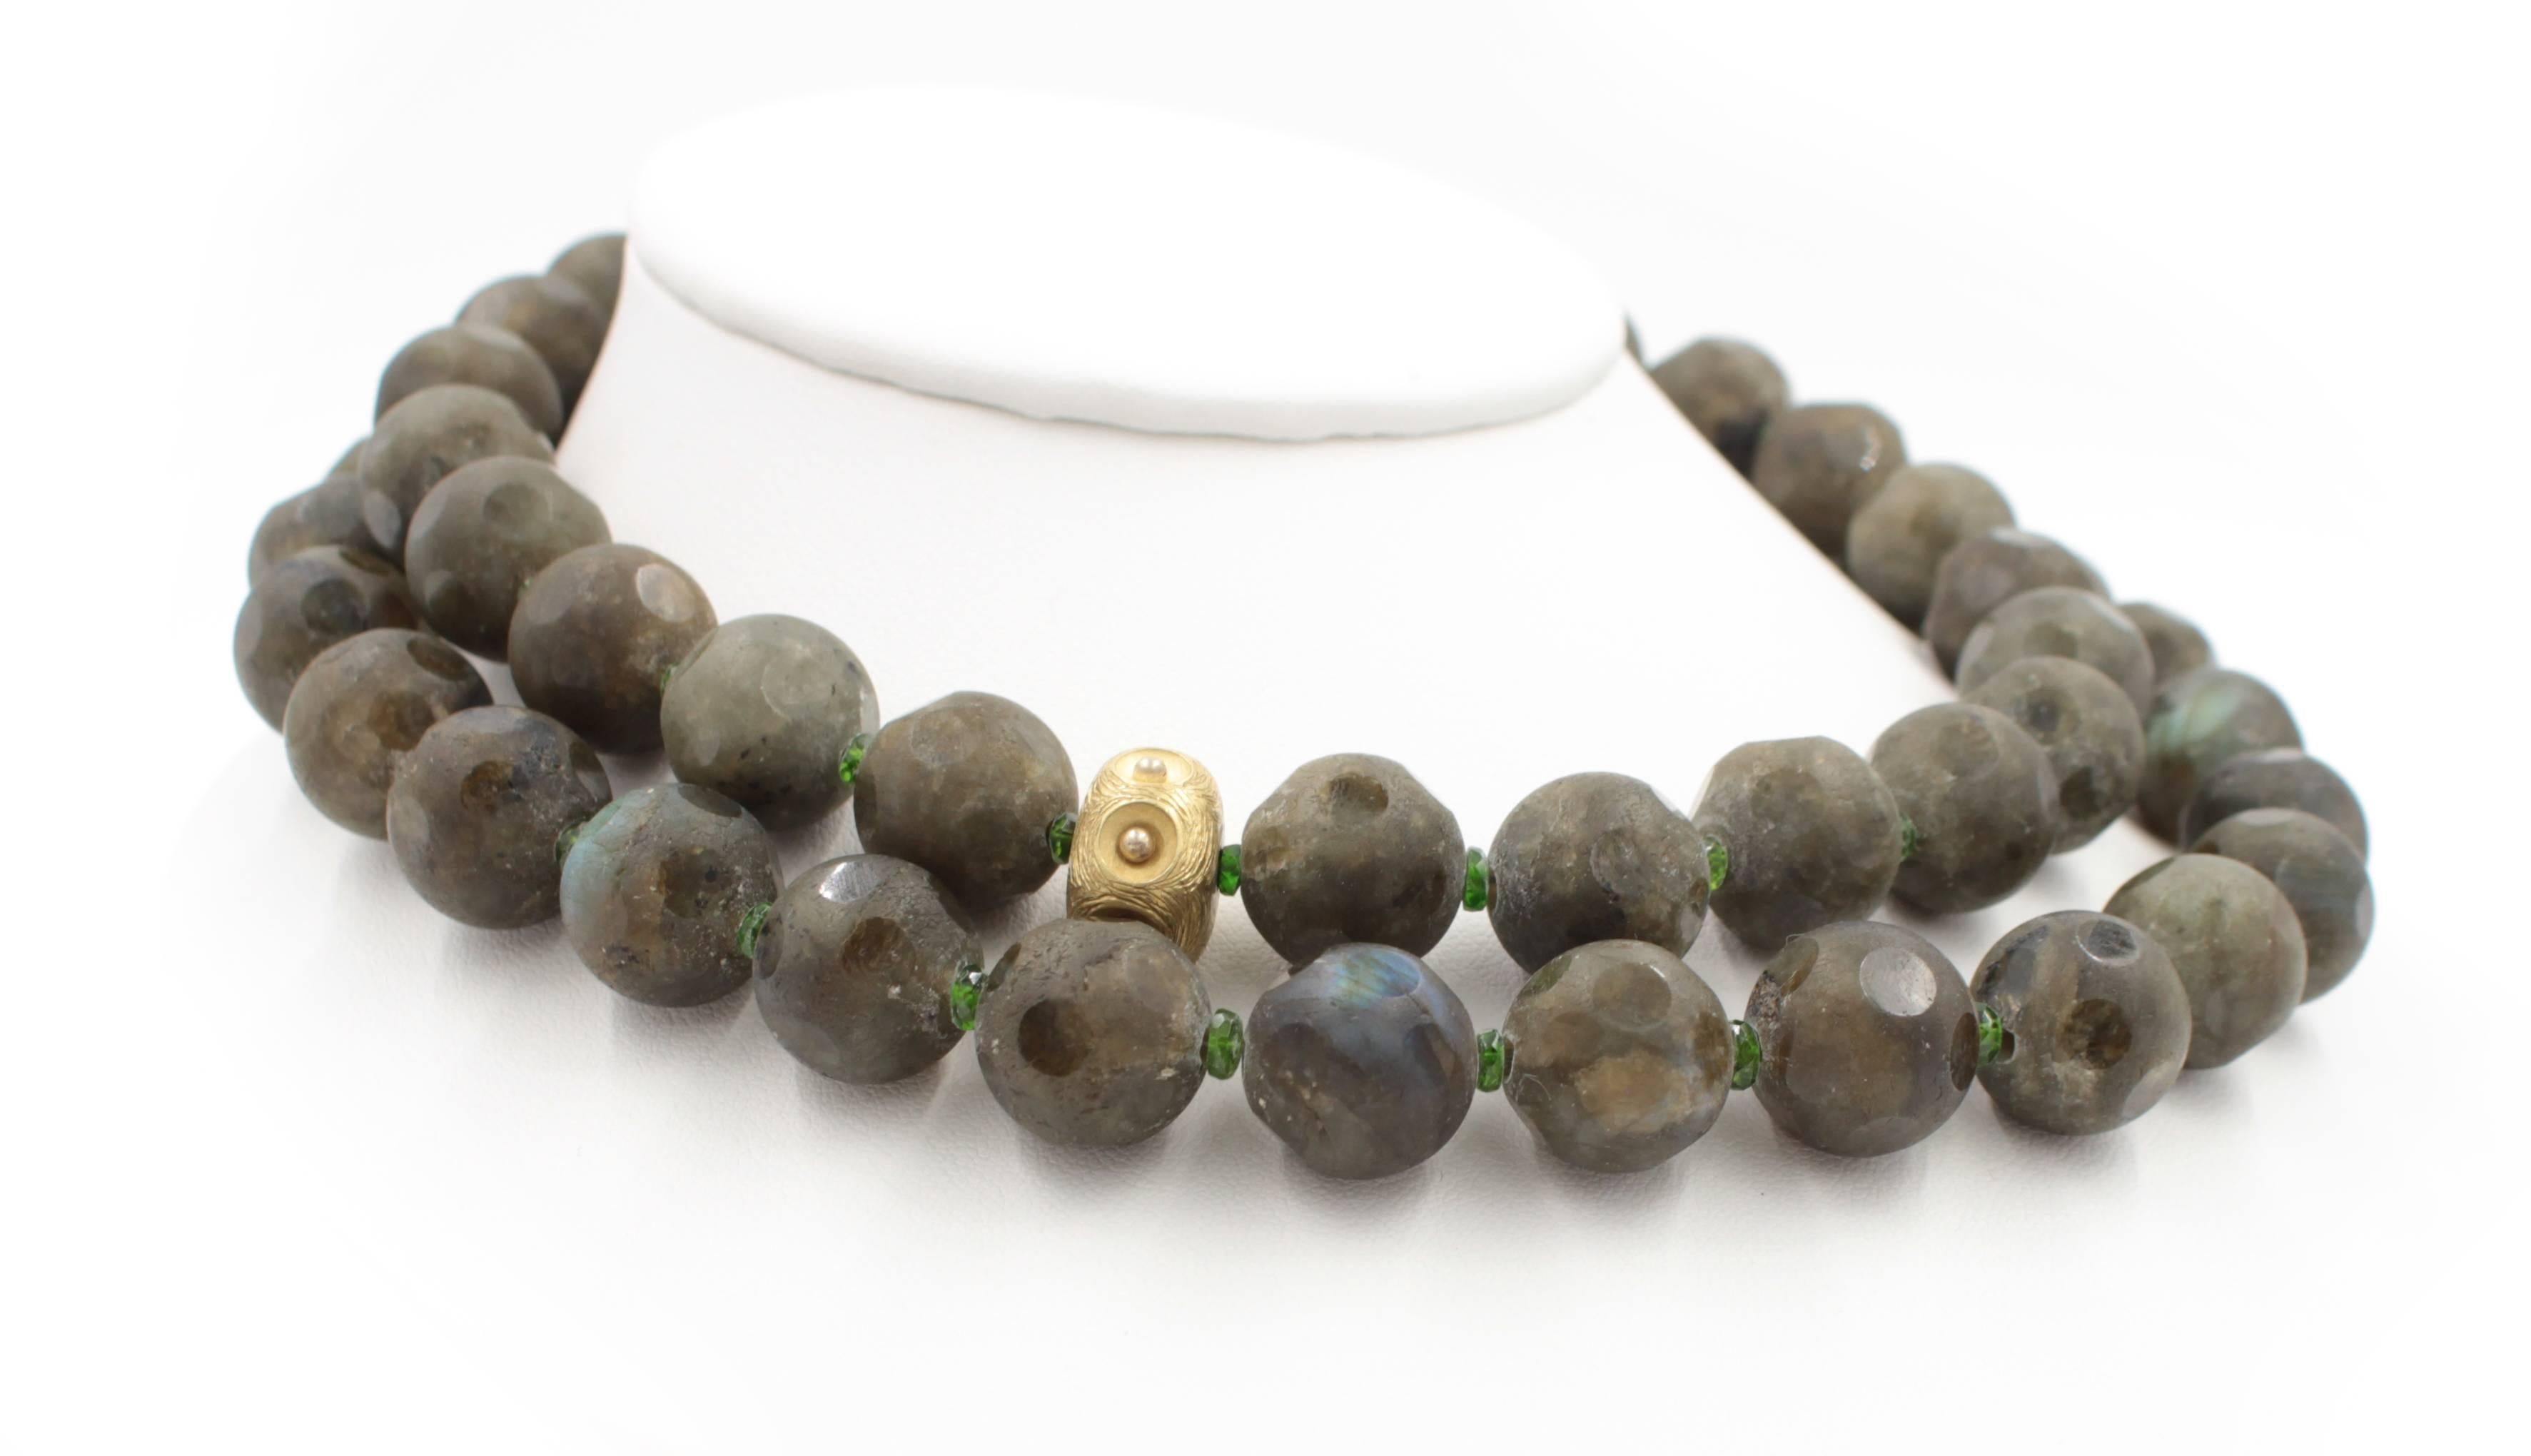 This elegant double strand necklace is made of specially cut gem quality labradorite beads. Each matte finish bead has a spattering of high polished circular shaped windows into the stone. This enhances the stone stunning iridescence. Between each